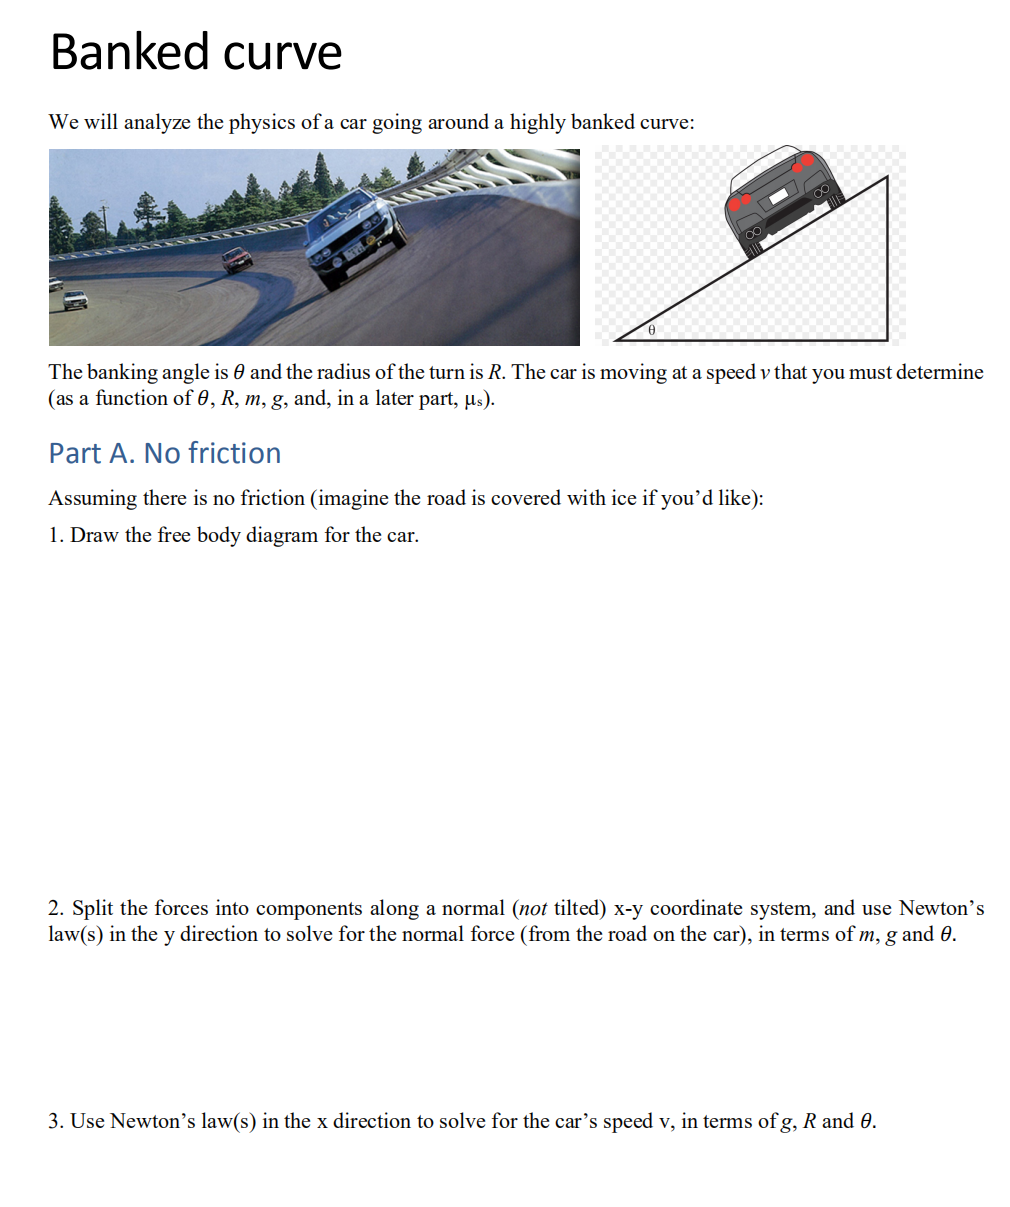 Banked curve
We will analyze the physics of a car going around a highly banked curve:
The banking angle is and the radius of the turn is R. The car is moving at a speed v that you must determine
(as a function of 0, R, m, g, and, in a later part, µs).
Part A. No friction
Assuming there is no friction (imagine the road is covered with ice if you'd like):
1. Draw the free body diagram for the car.
2. Split the forces into components along a normal (not tilted) x-y coordinate system, and use Newton's
law(s) in the y direction to solve for the normal force (from the road on the car), in terms of m, g and 0.
3. Use Newton's law(s) in the x direction to solve for the car's speed v, in terms of g, R and 0.